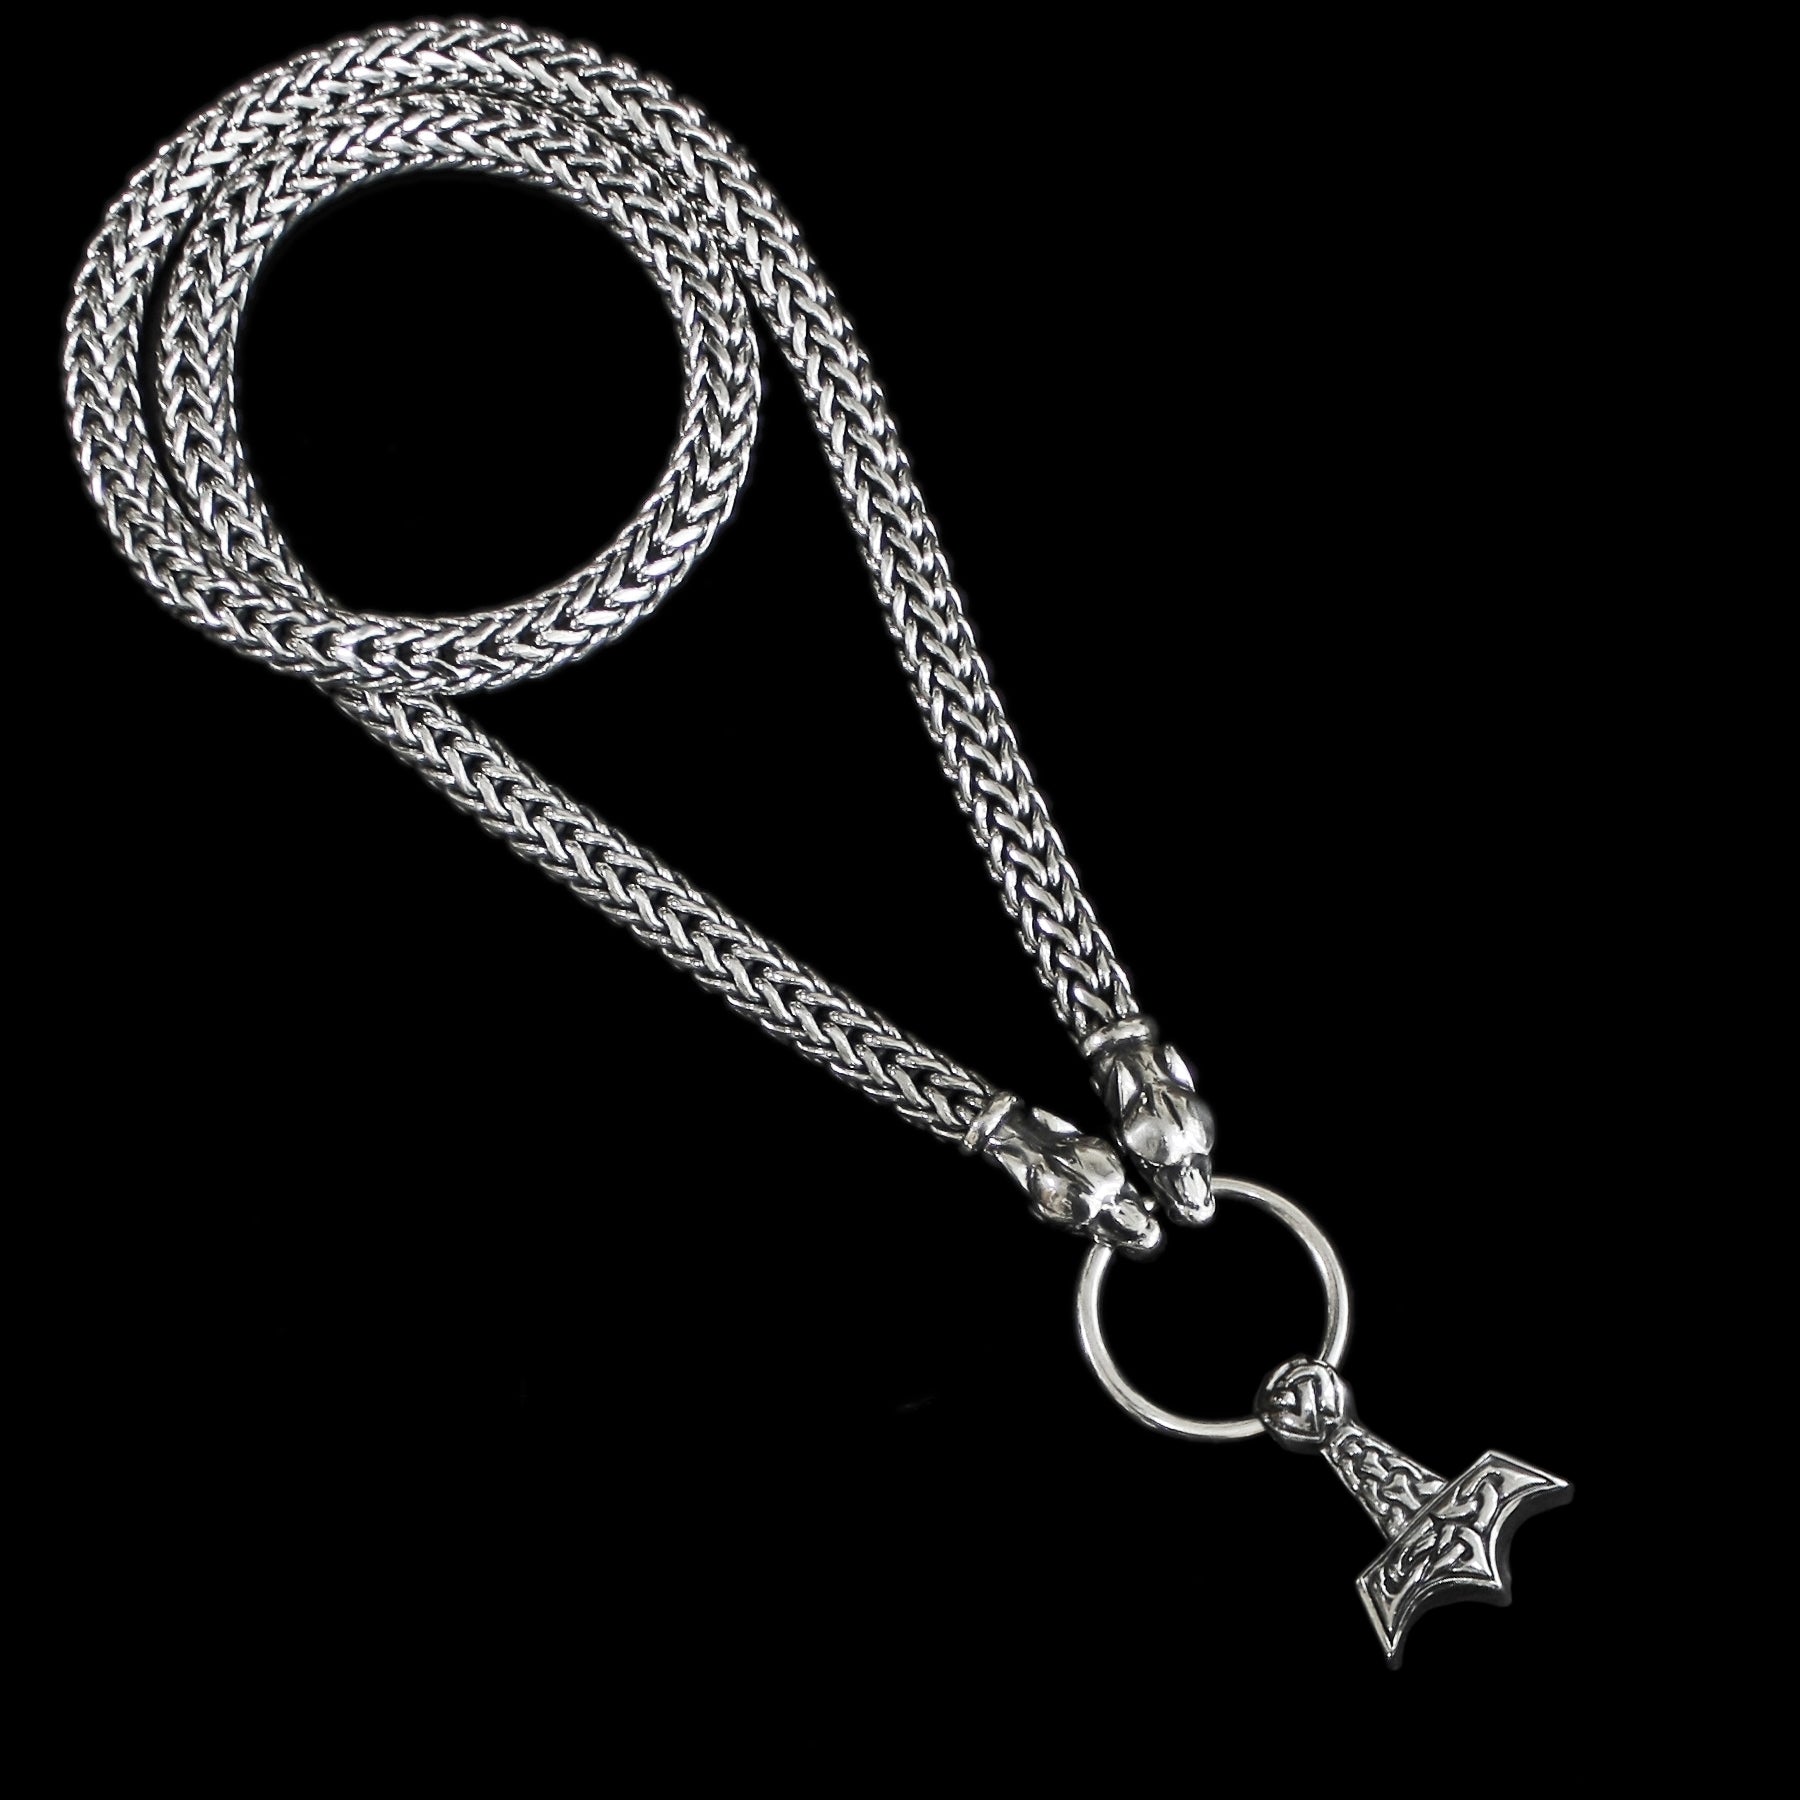 8mm Thick Silver Snake Chain Thor's Hammer Necklace with Ferocious Wolf Heads with Knotwork Thor's Hammer Pendant - Viking Jewelry